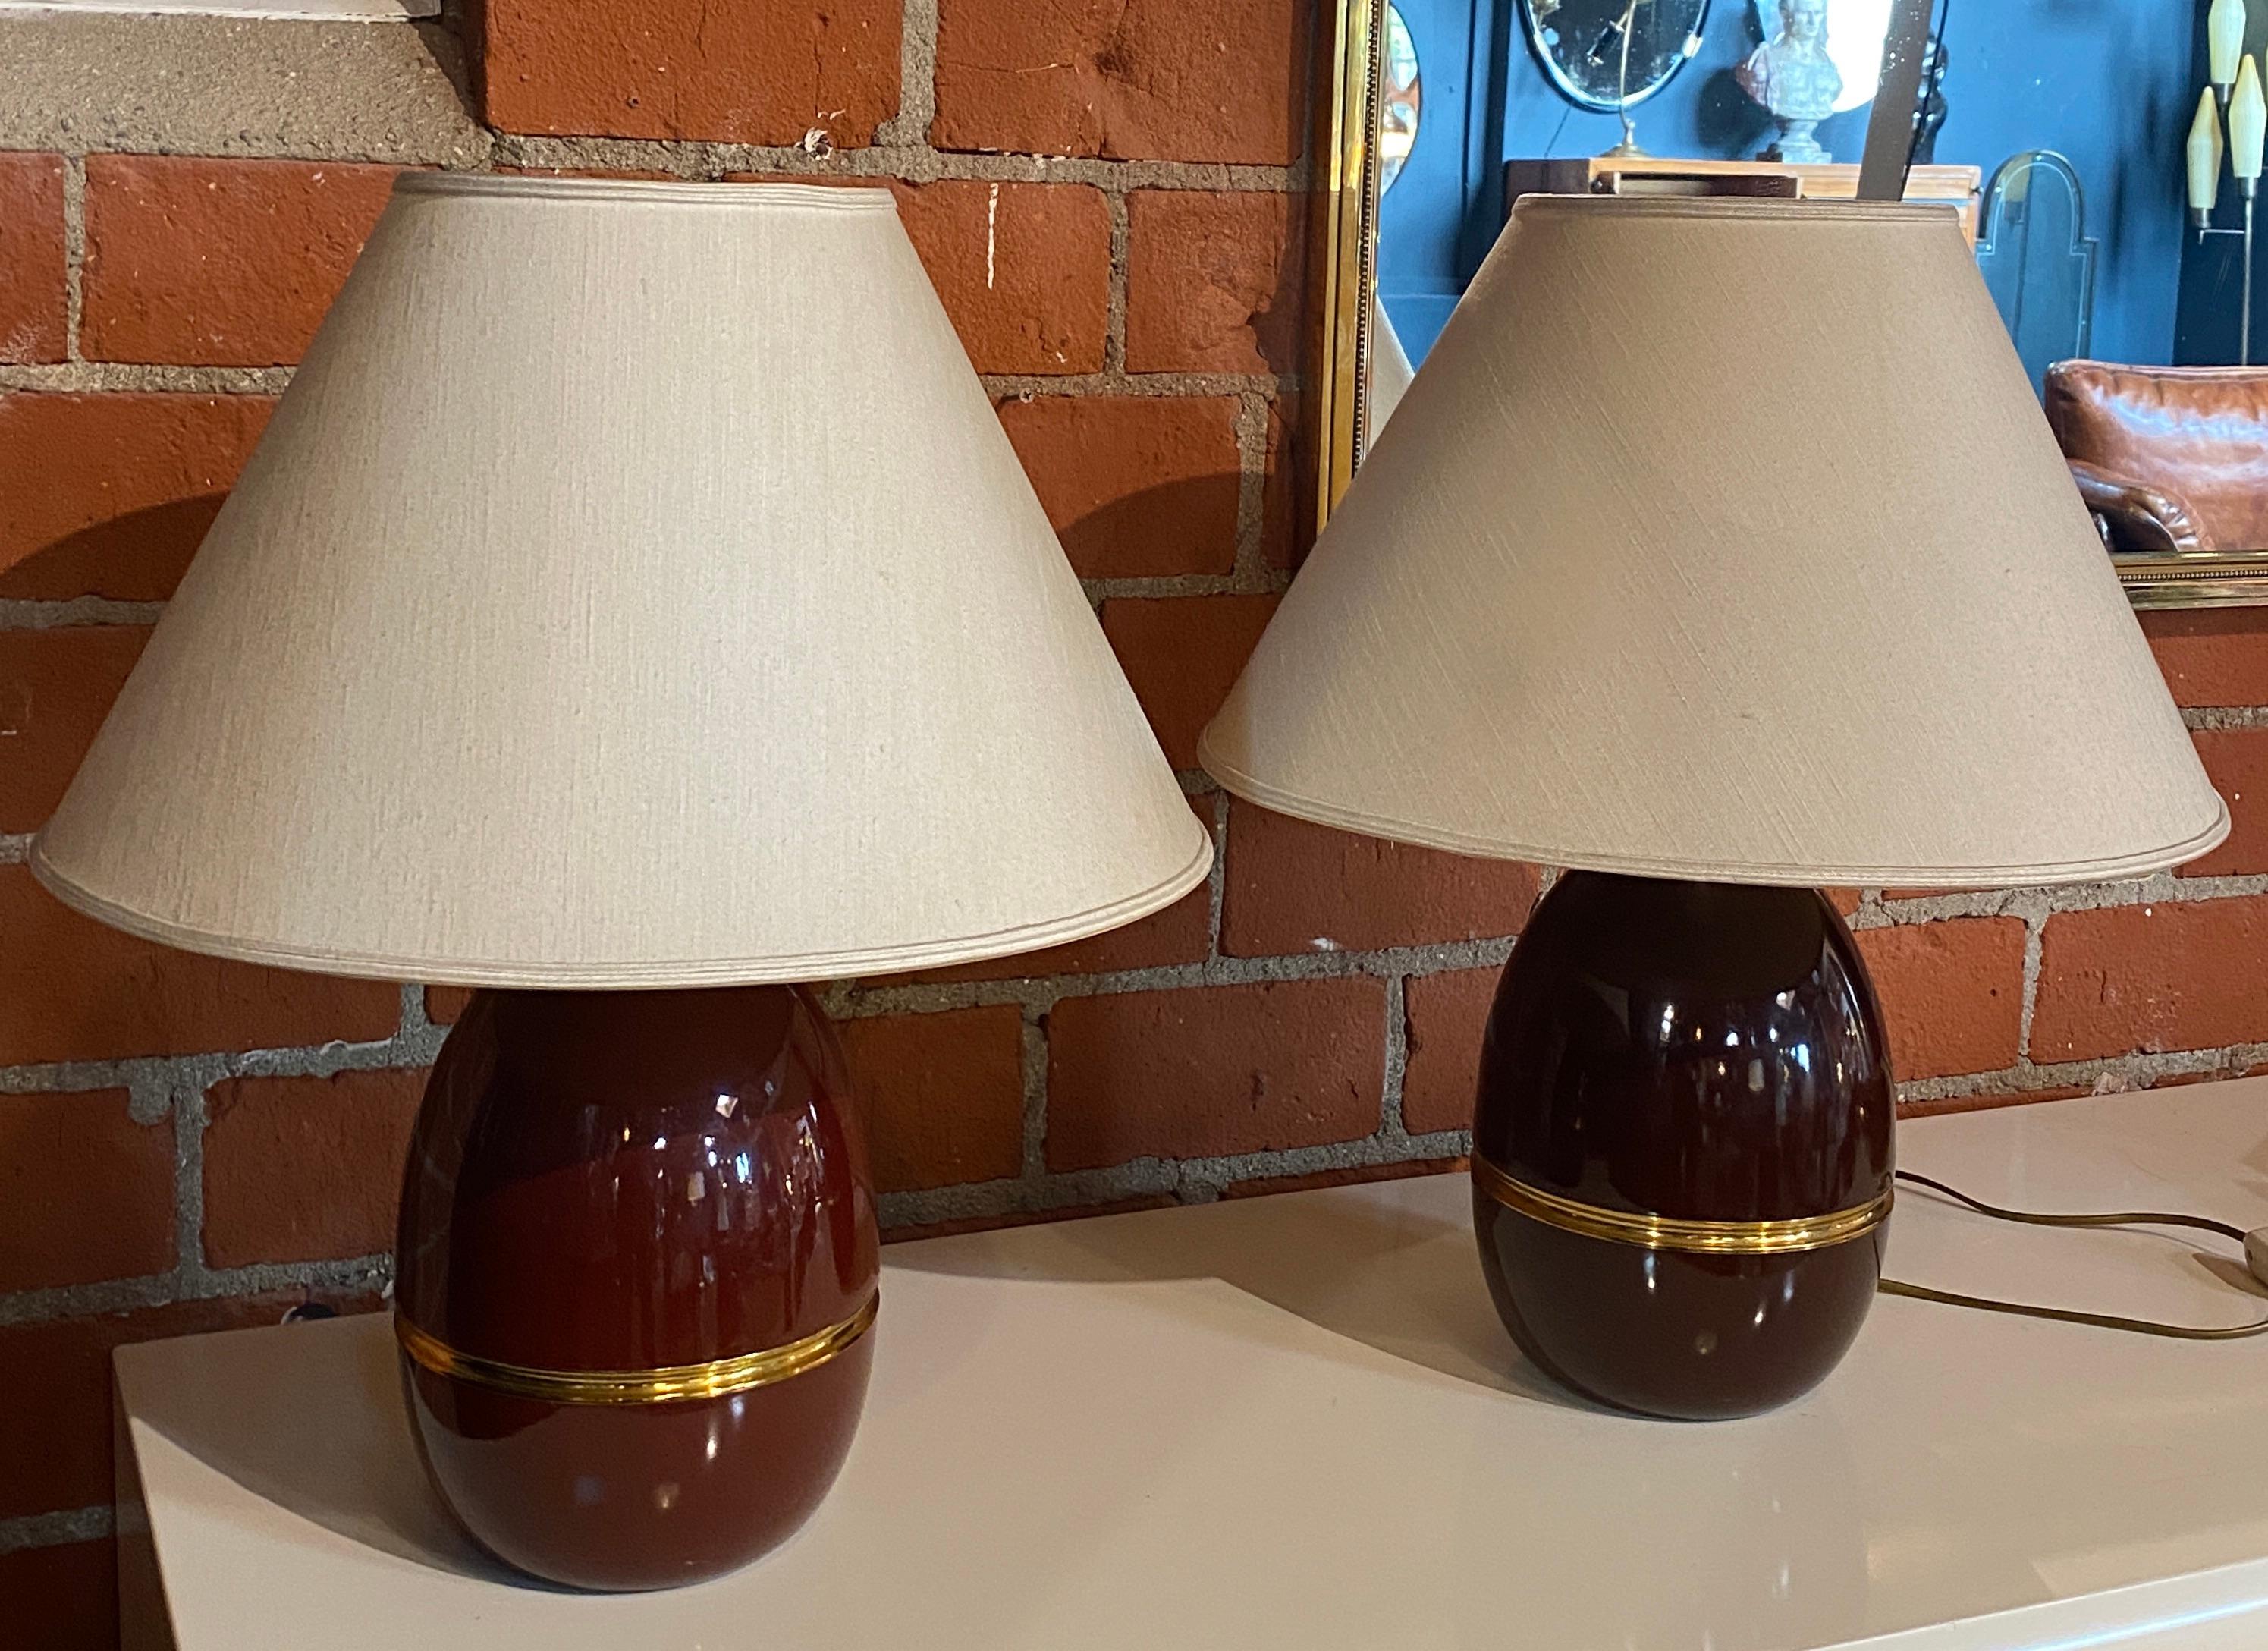 Wonderful pair of burgundy colored table lamps with a brass line in the center of the base.
The lamps are equipped with lampshades in excellent condition as the bases, as you can see the lamps have a beautiful and unique design that is ready to